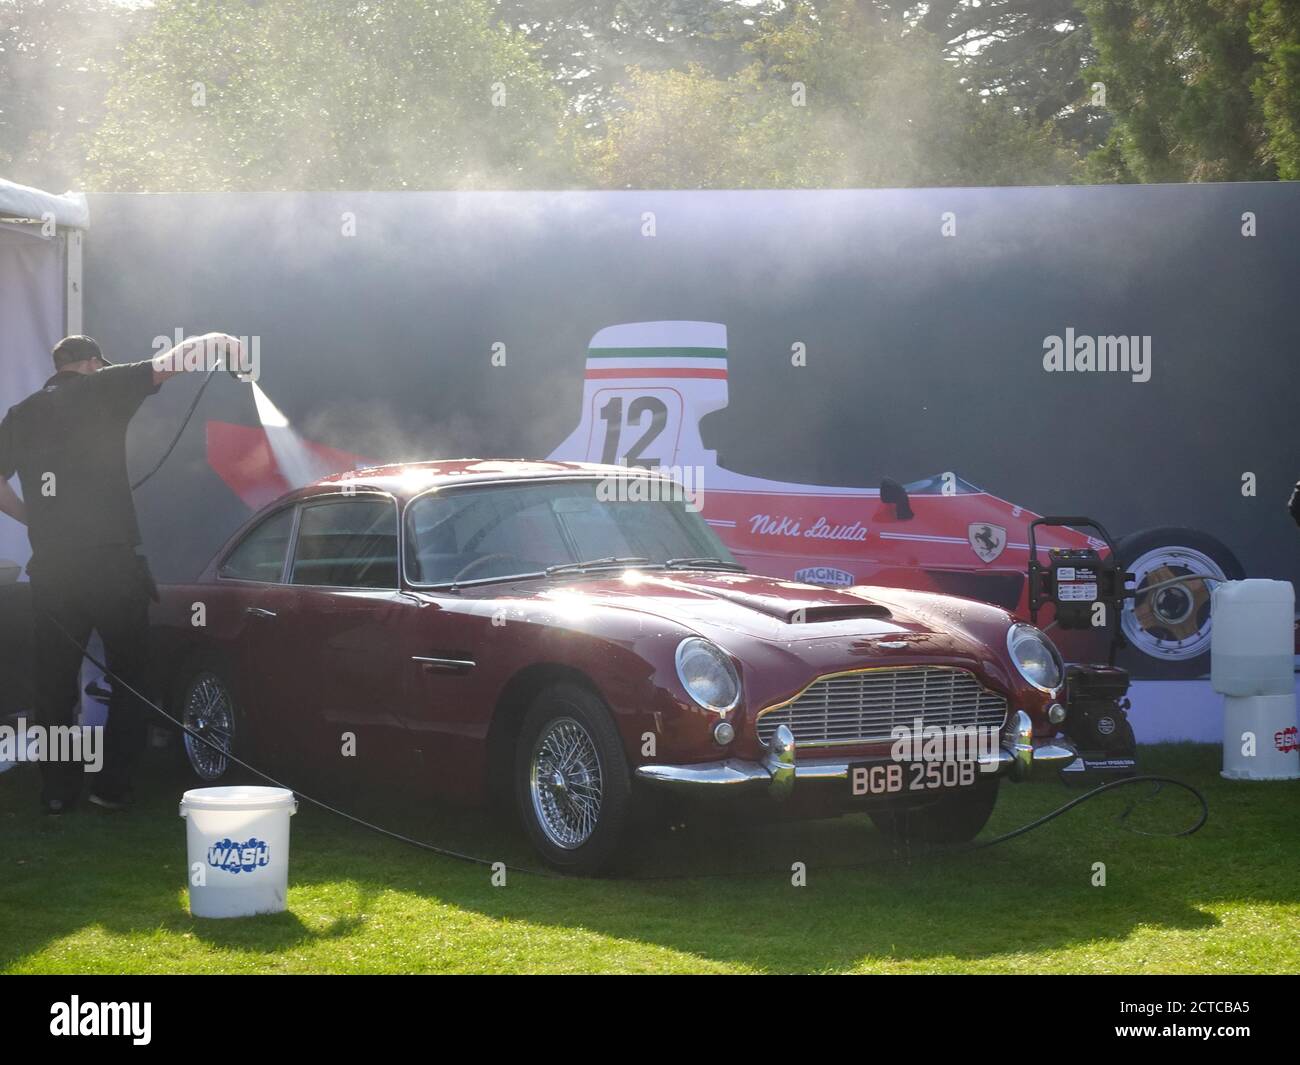 Blenheim Palace, Oxford, UK. 22nd Sep, 2020. An Aston Martin gets an early morning wash At the famous Salon Prive held at Blenheim Palace Credit: Motofoto/Alamy Live News Stock Photo